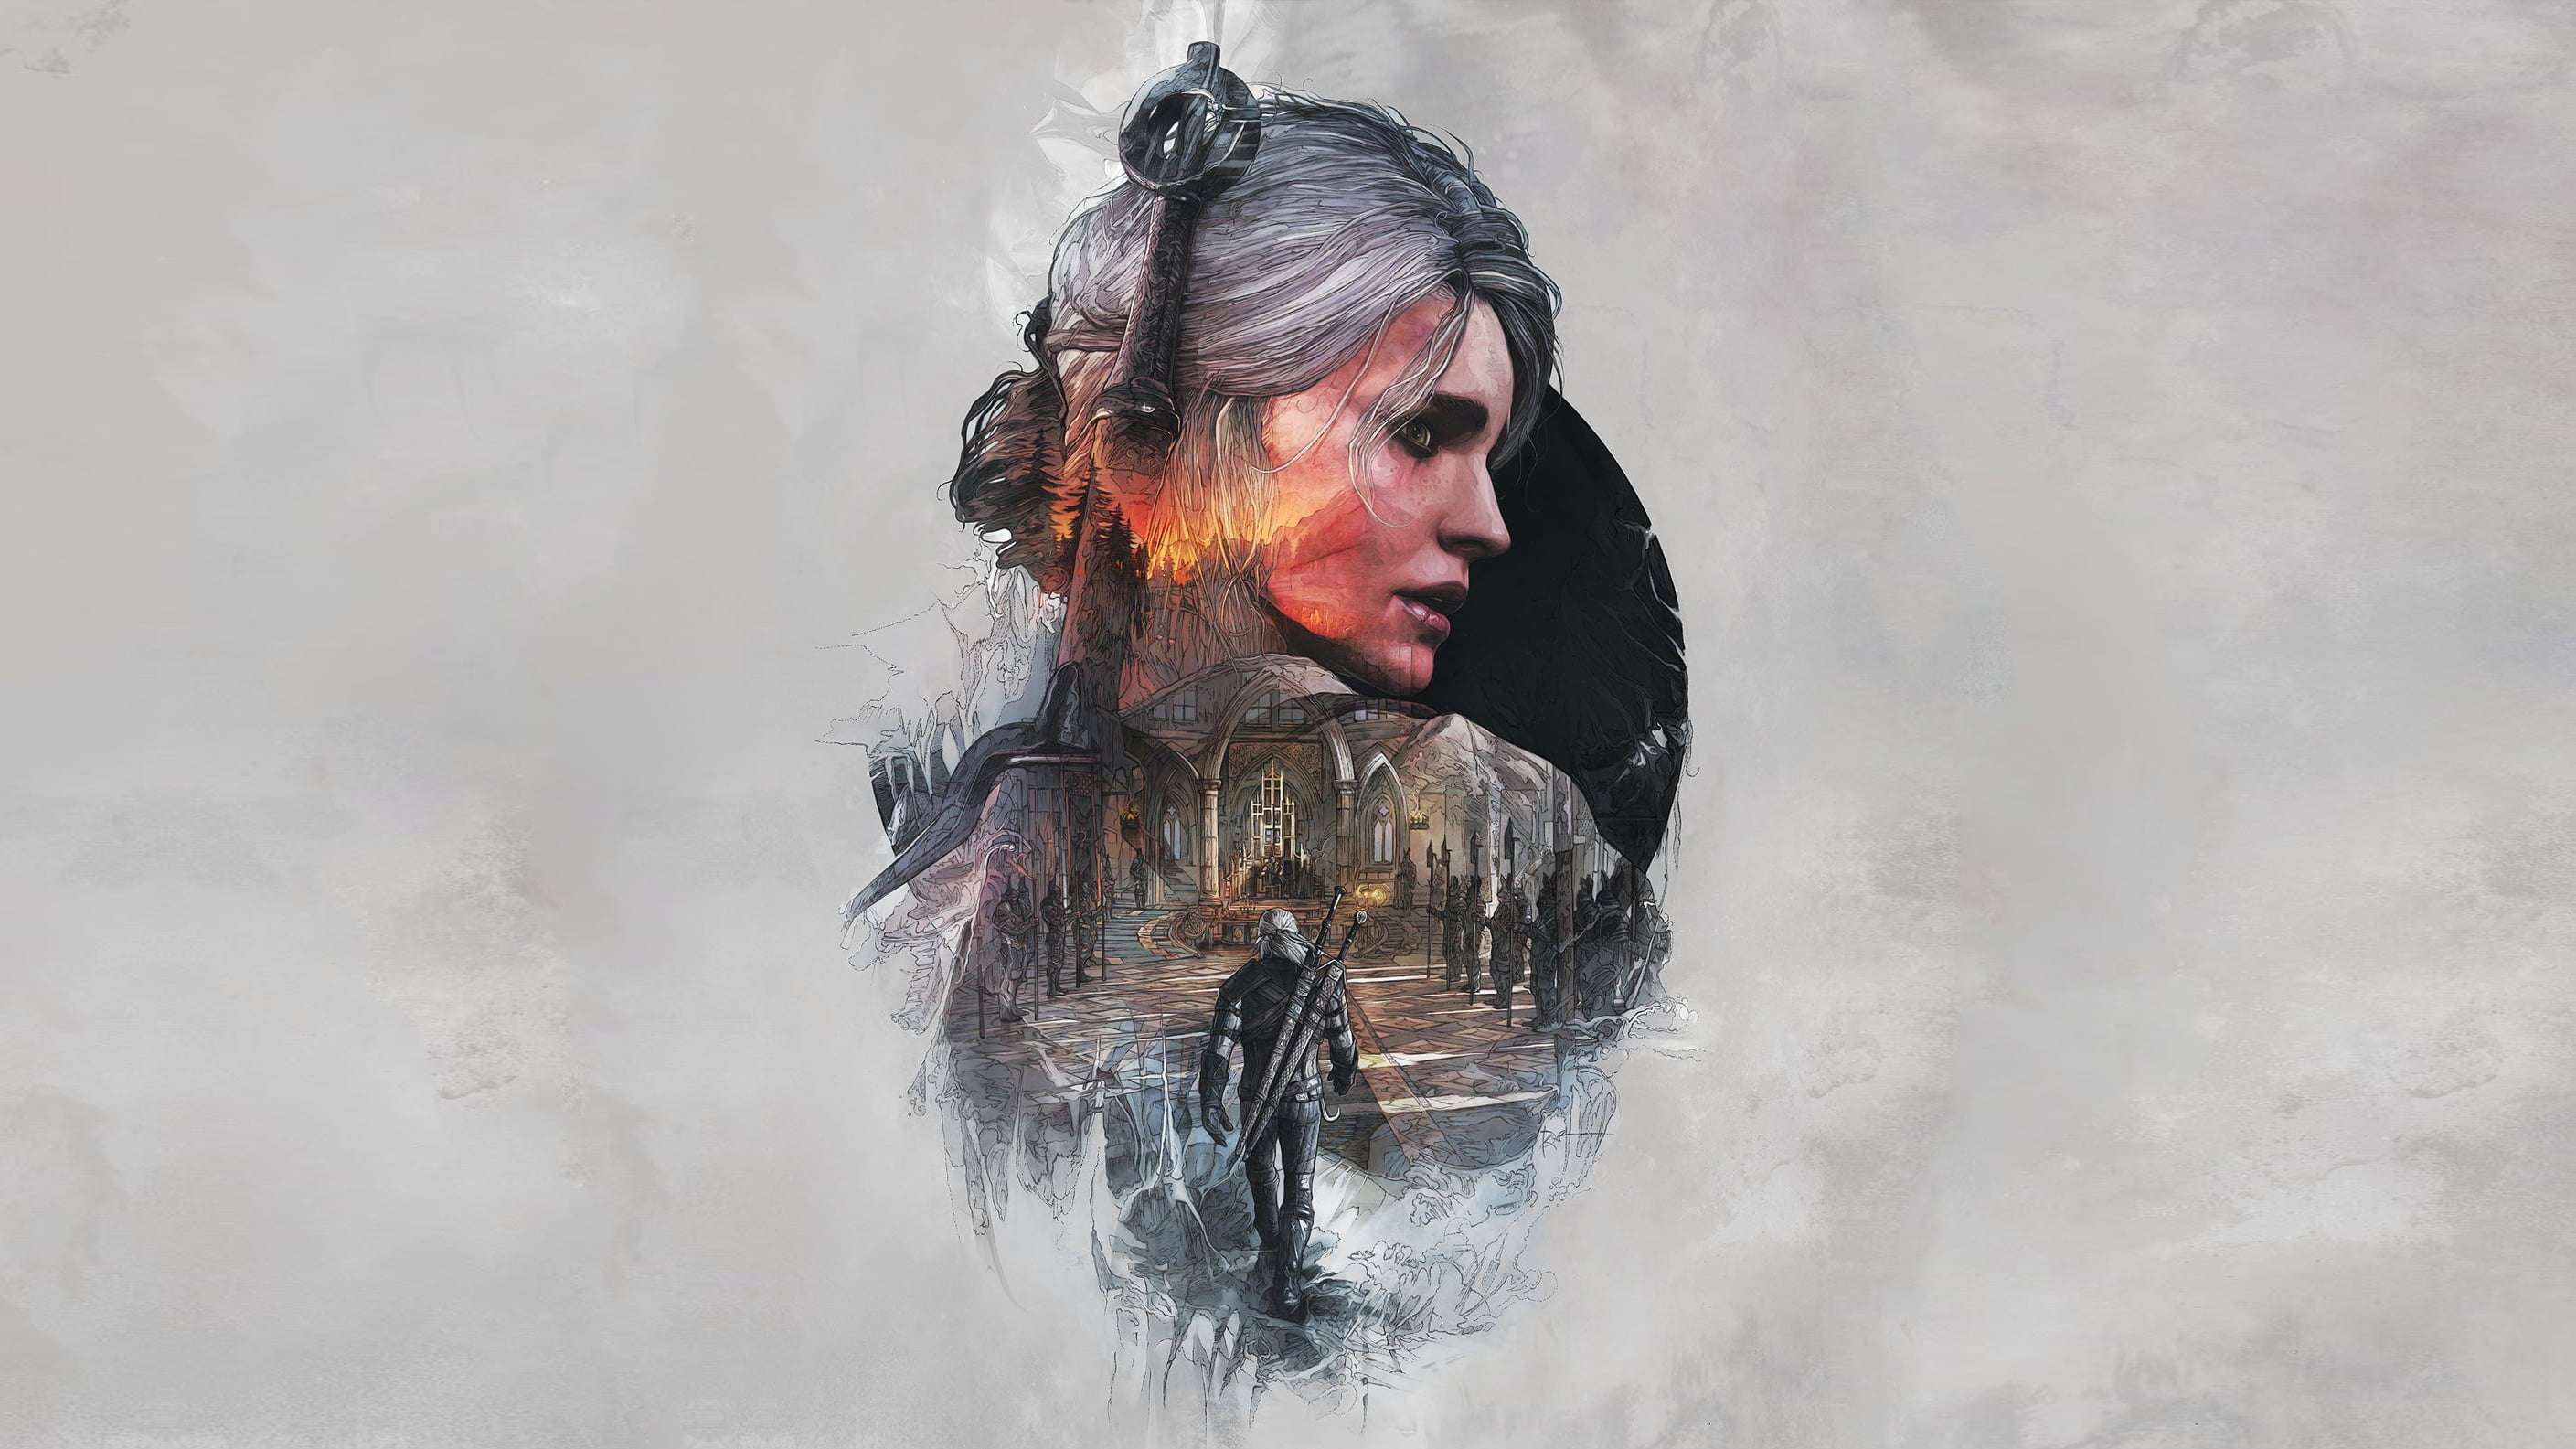 woman wearing black top illustration, The Witcher, The Witcher 3: Wild Hunt